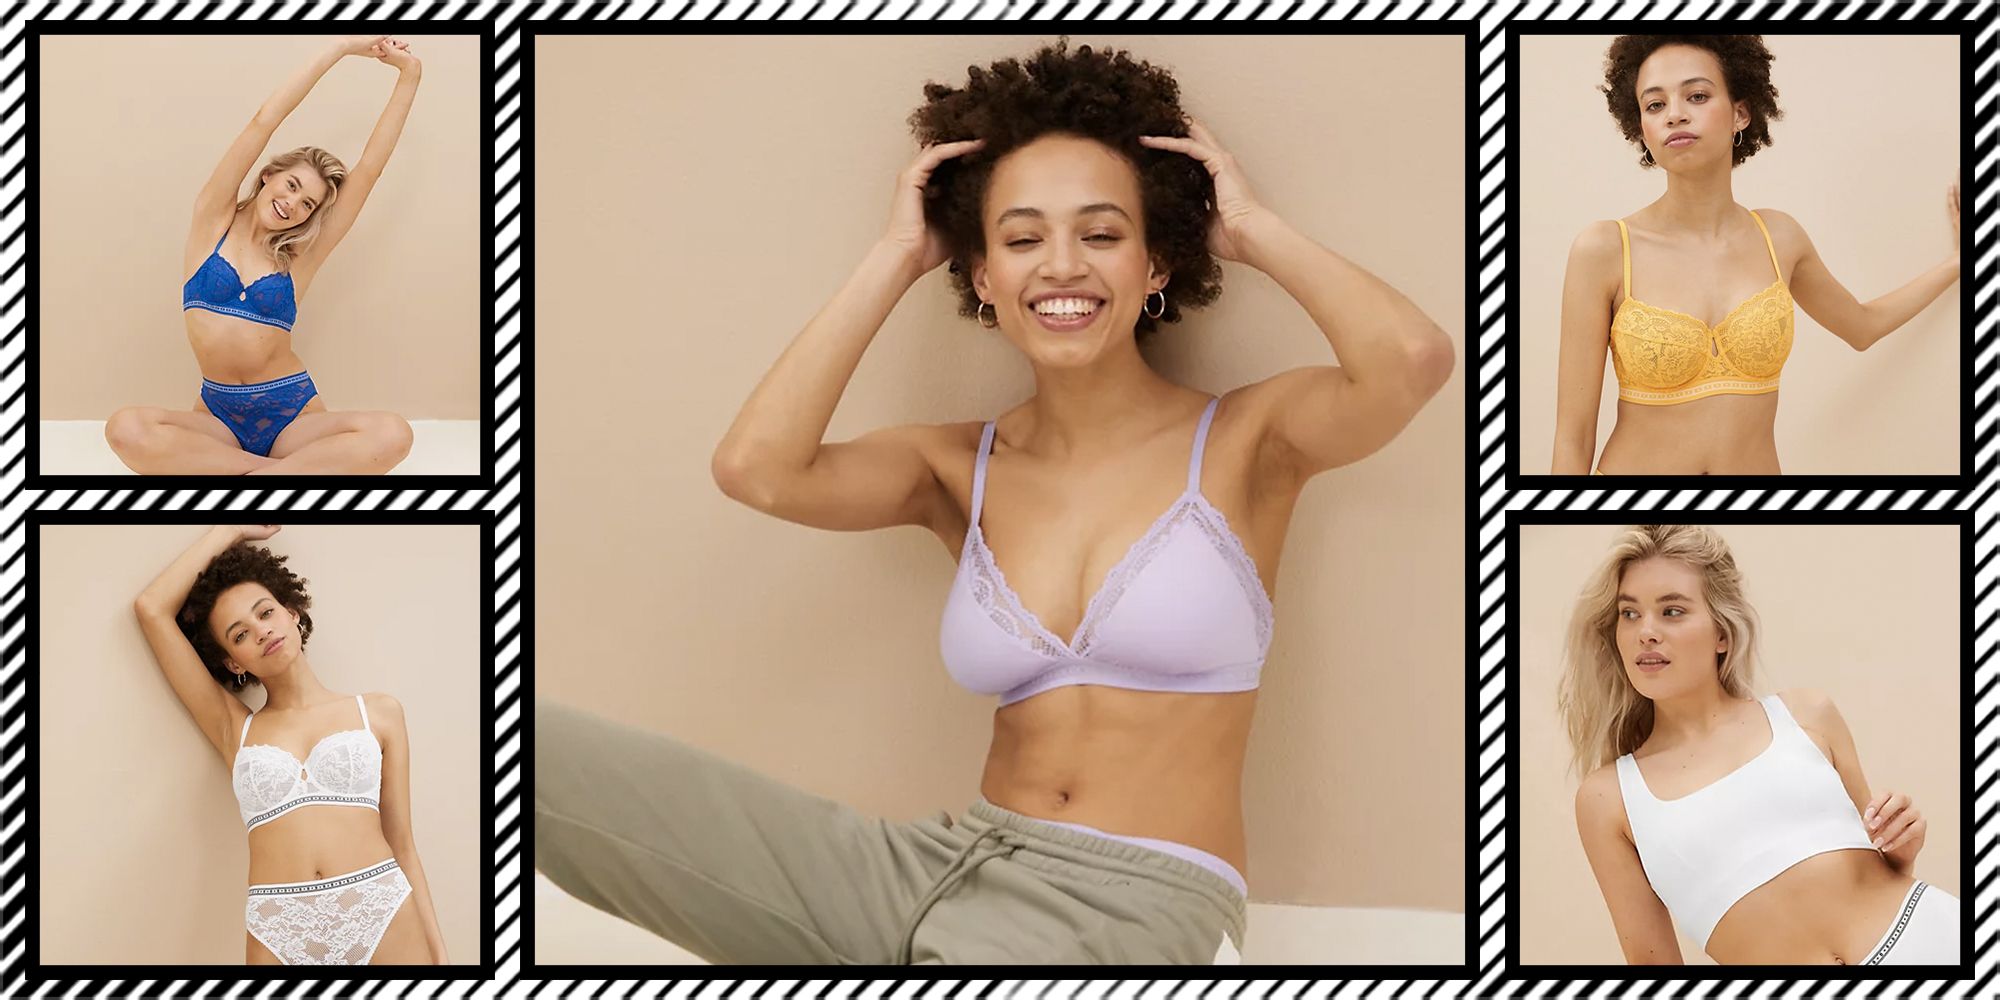 Caledonia Park - Marks and Spencer Outlet has launched the Bra Fit  Campaign…that means you can save £5 when you spend £30 or more on lingerie!